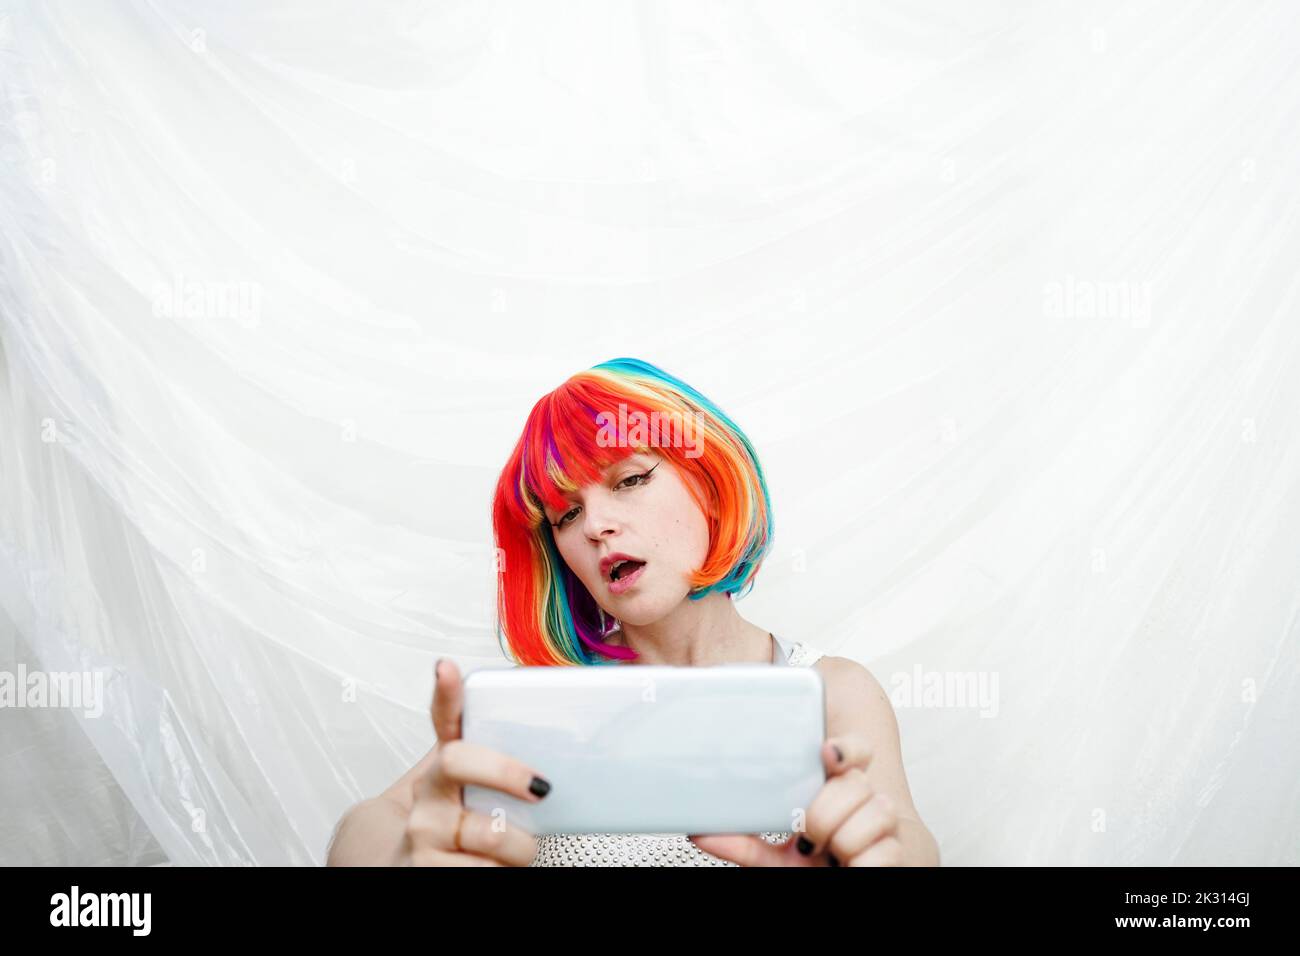 Woman with multi colored hair taking selfie through smart phone Stock Photo